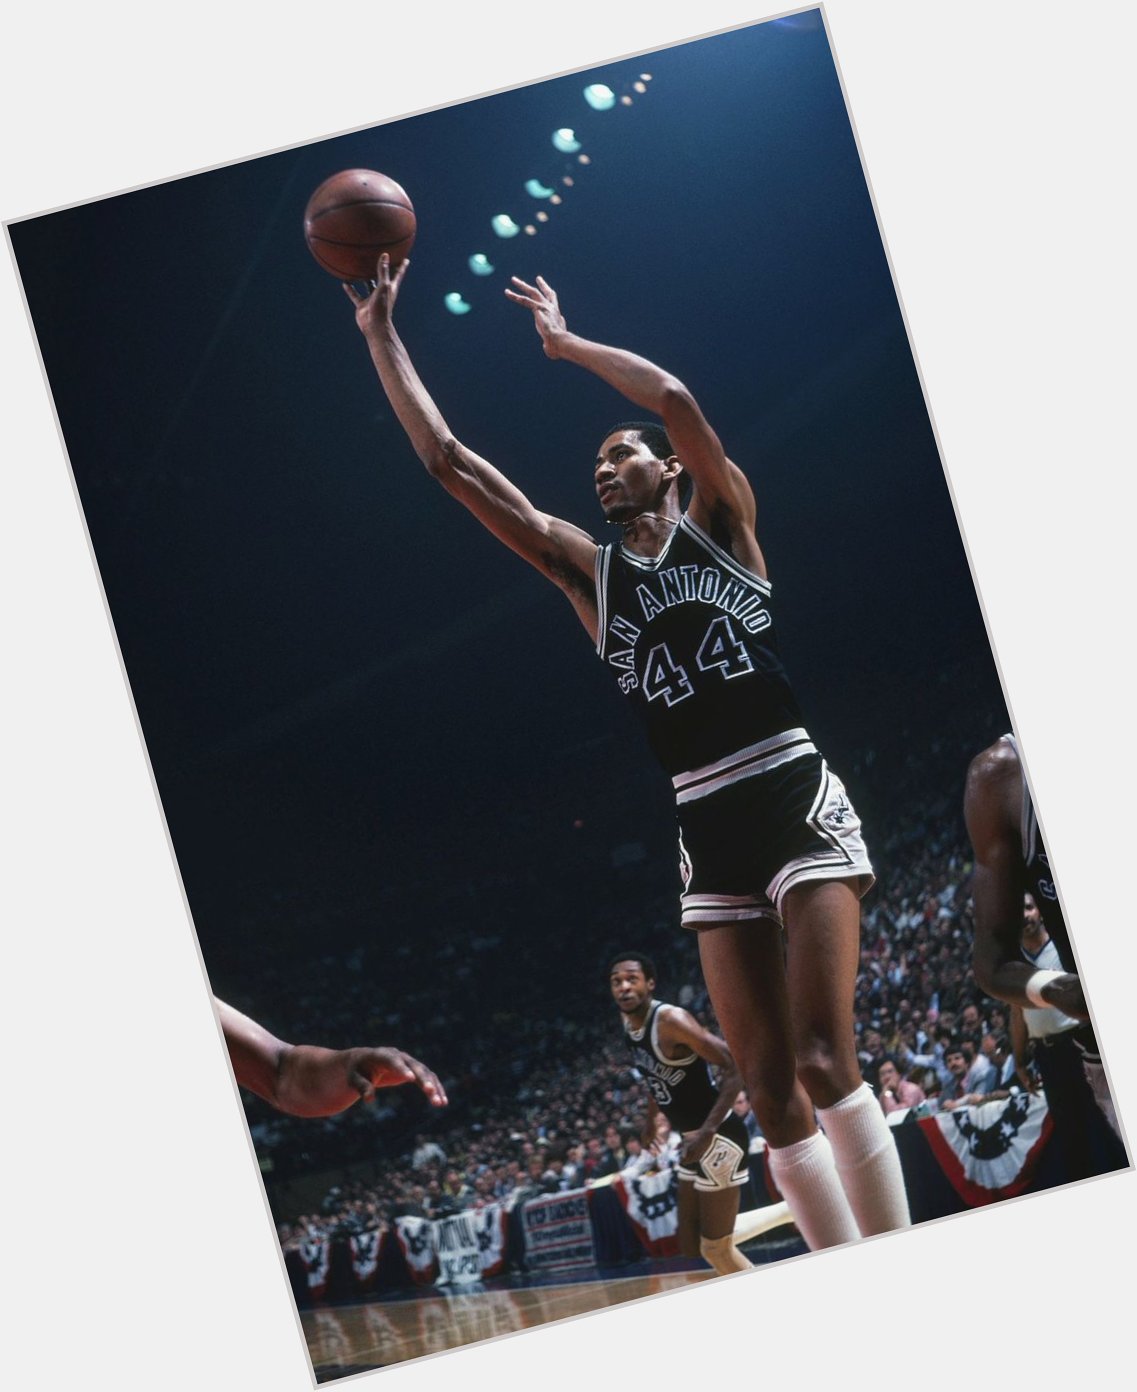 Happy Birthday to the Iceman, George Gervin.  